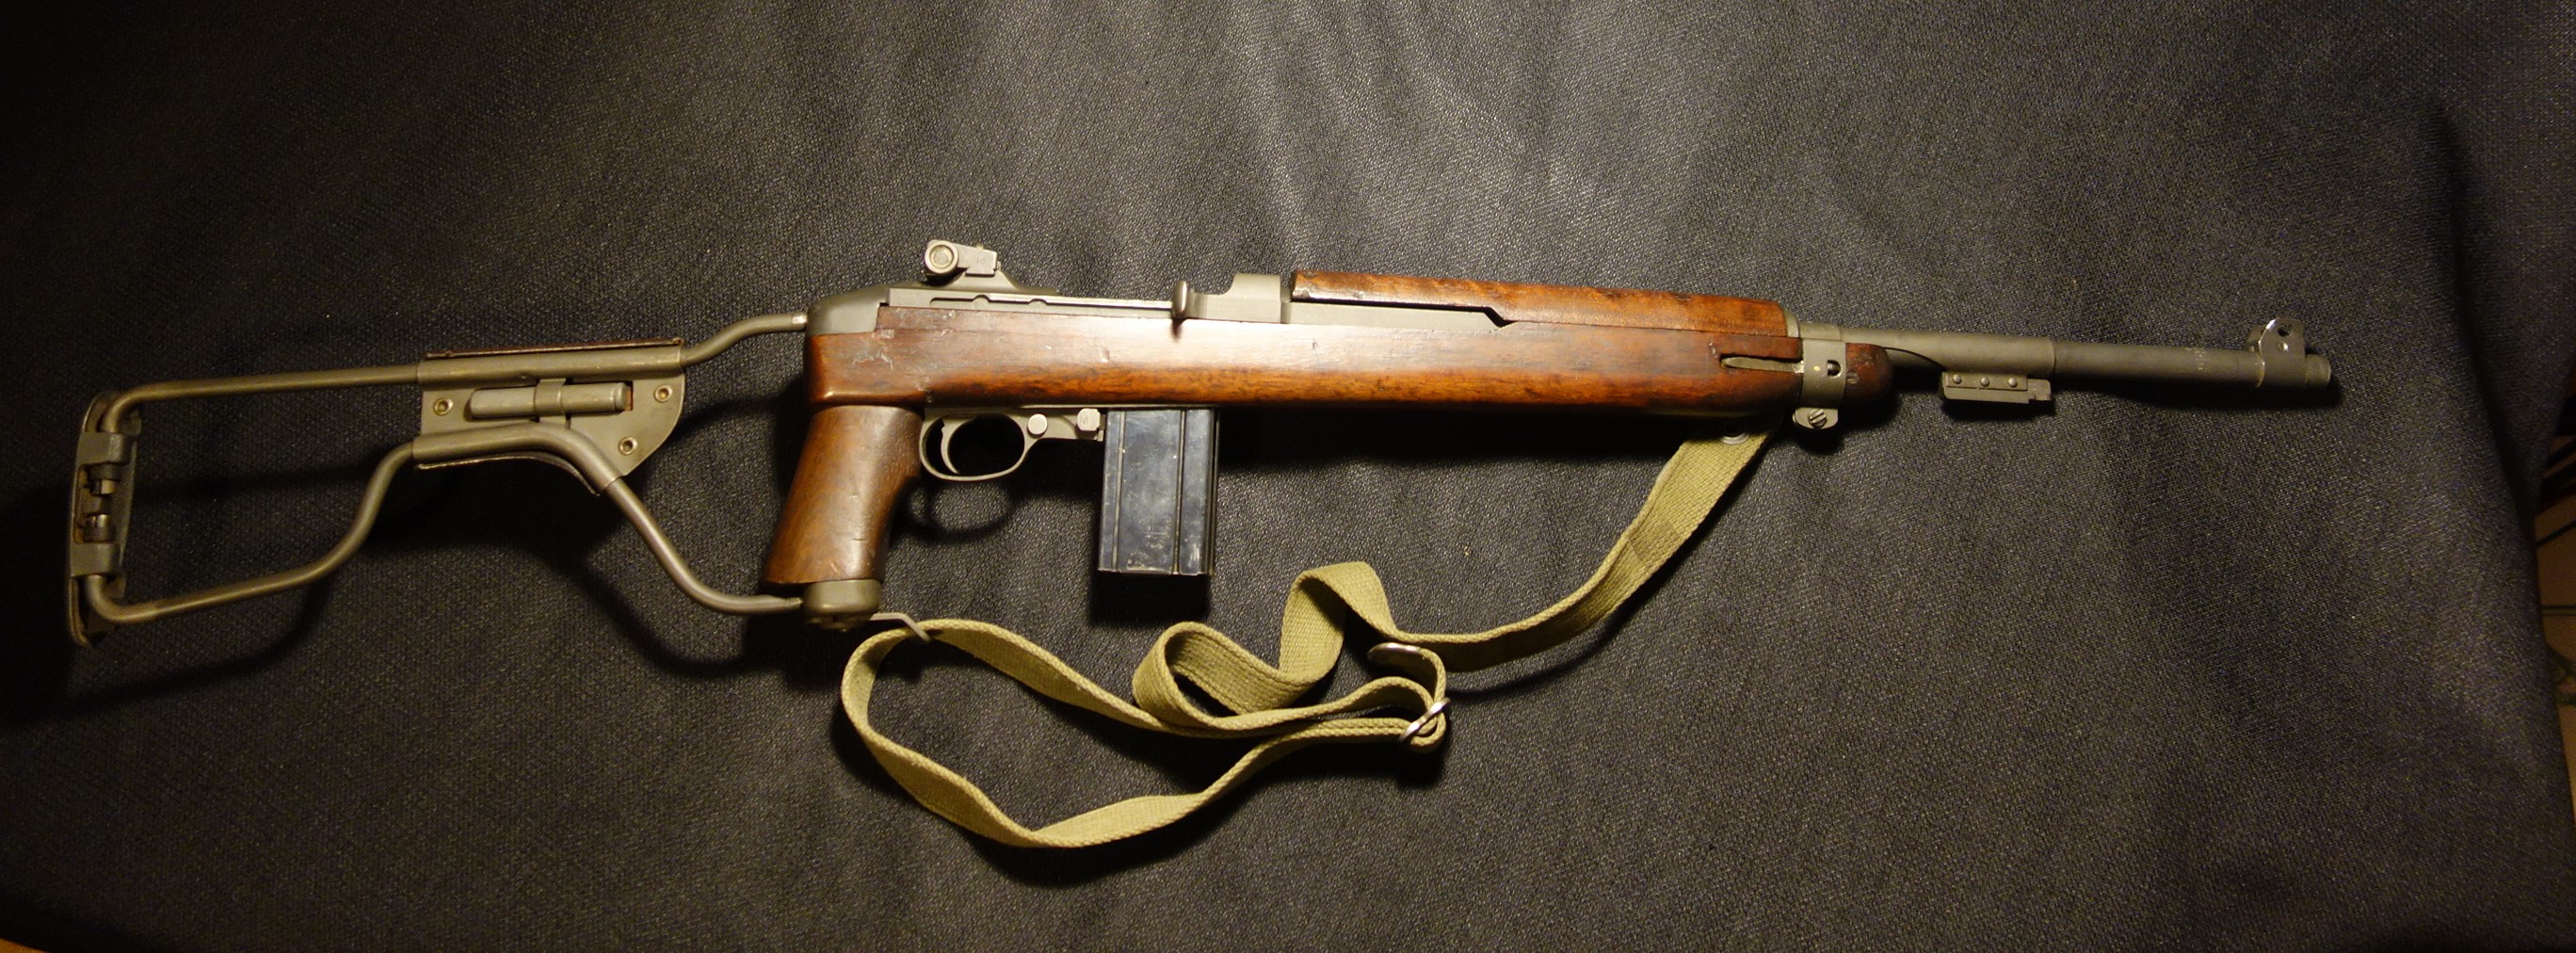 Related image of Inland Manufacturing M1a1 Paratrooper Carbine.